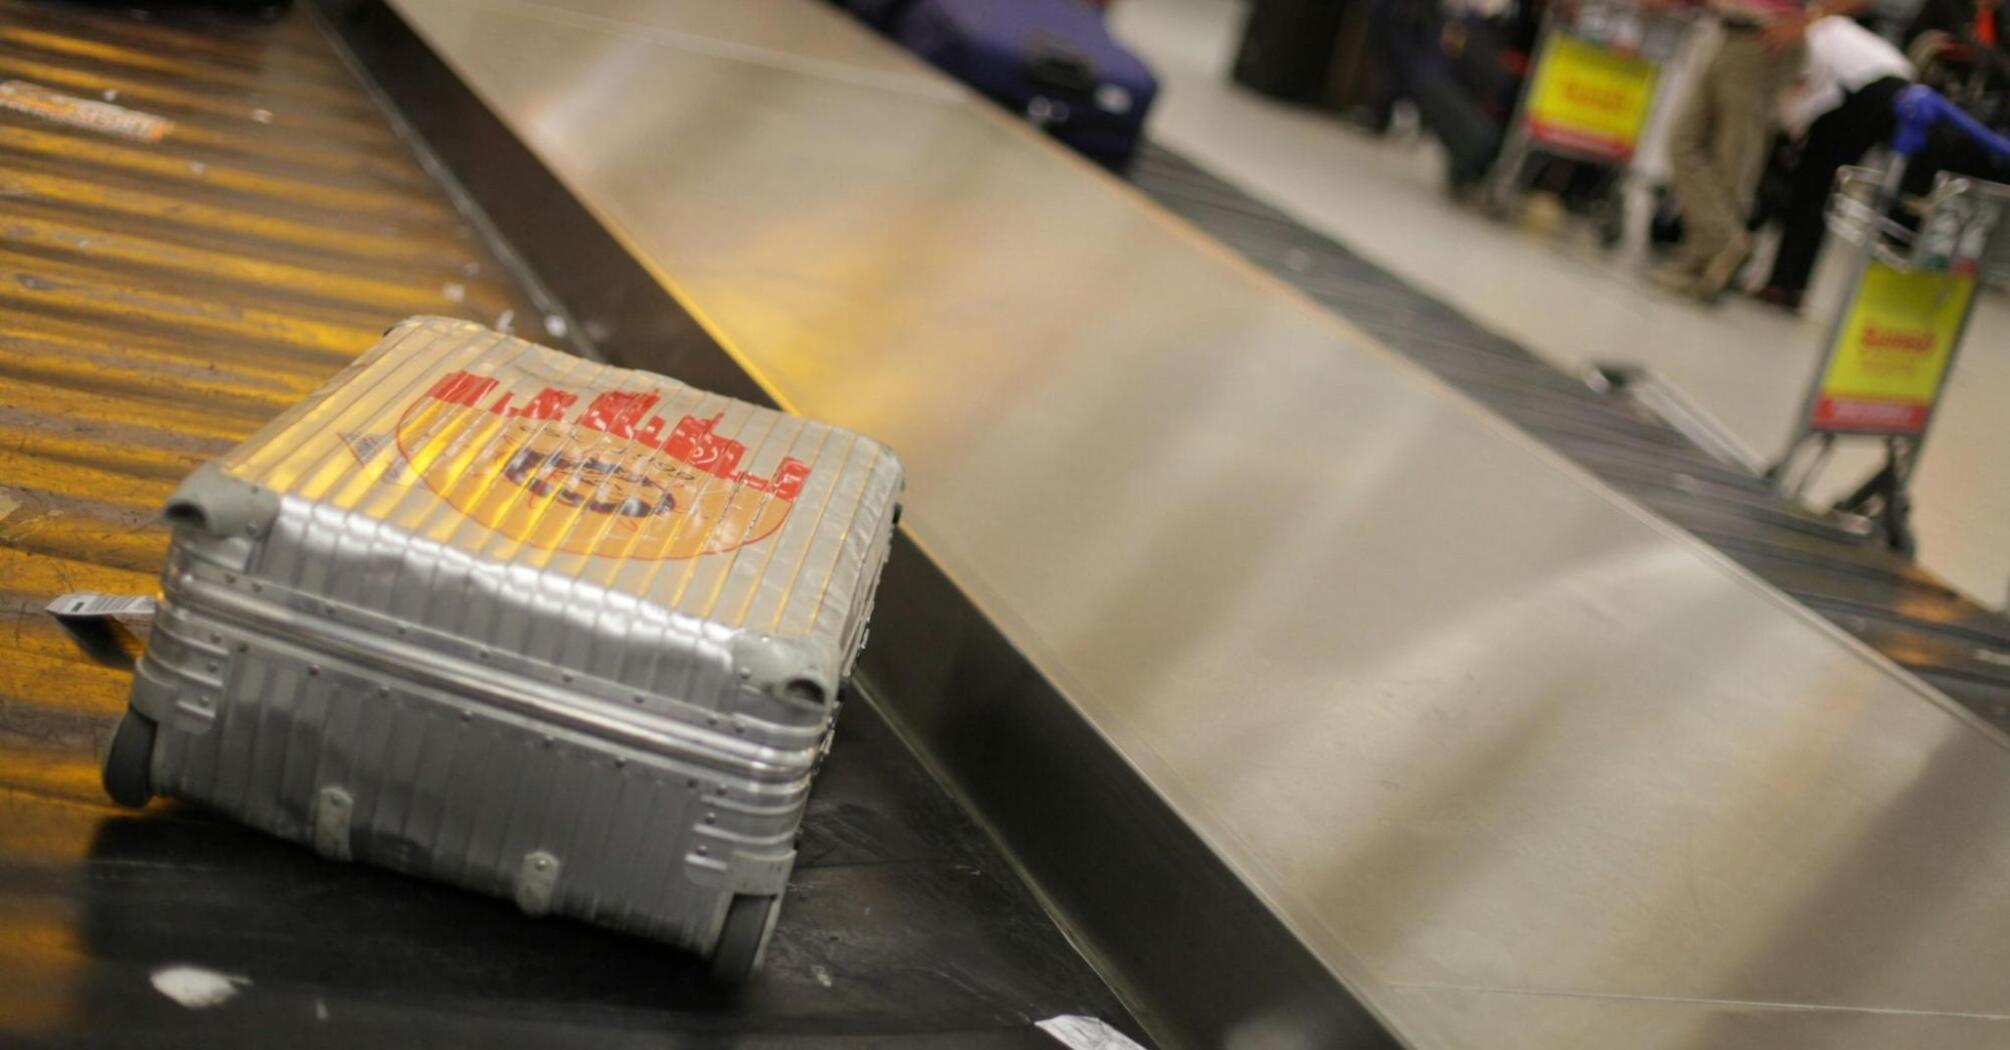 A suitcase on the baggage carousel at the airport, waiting for its owner